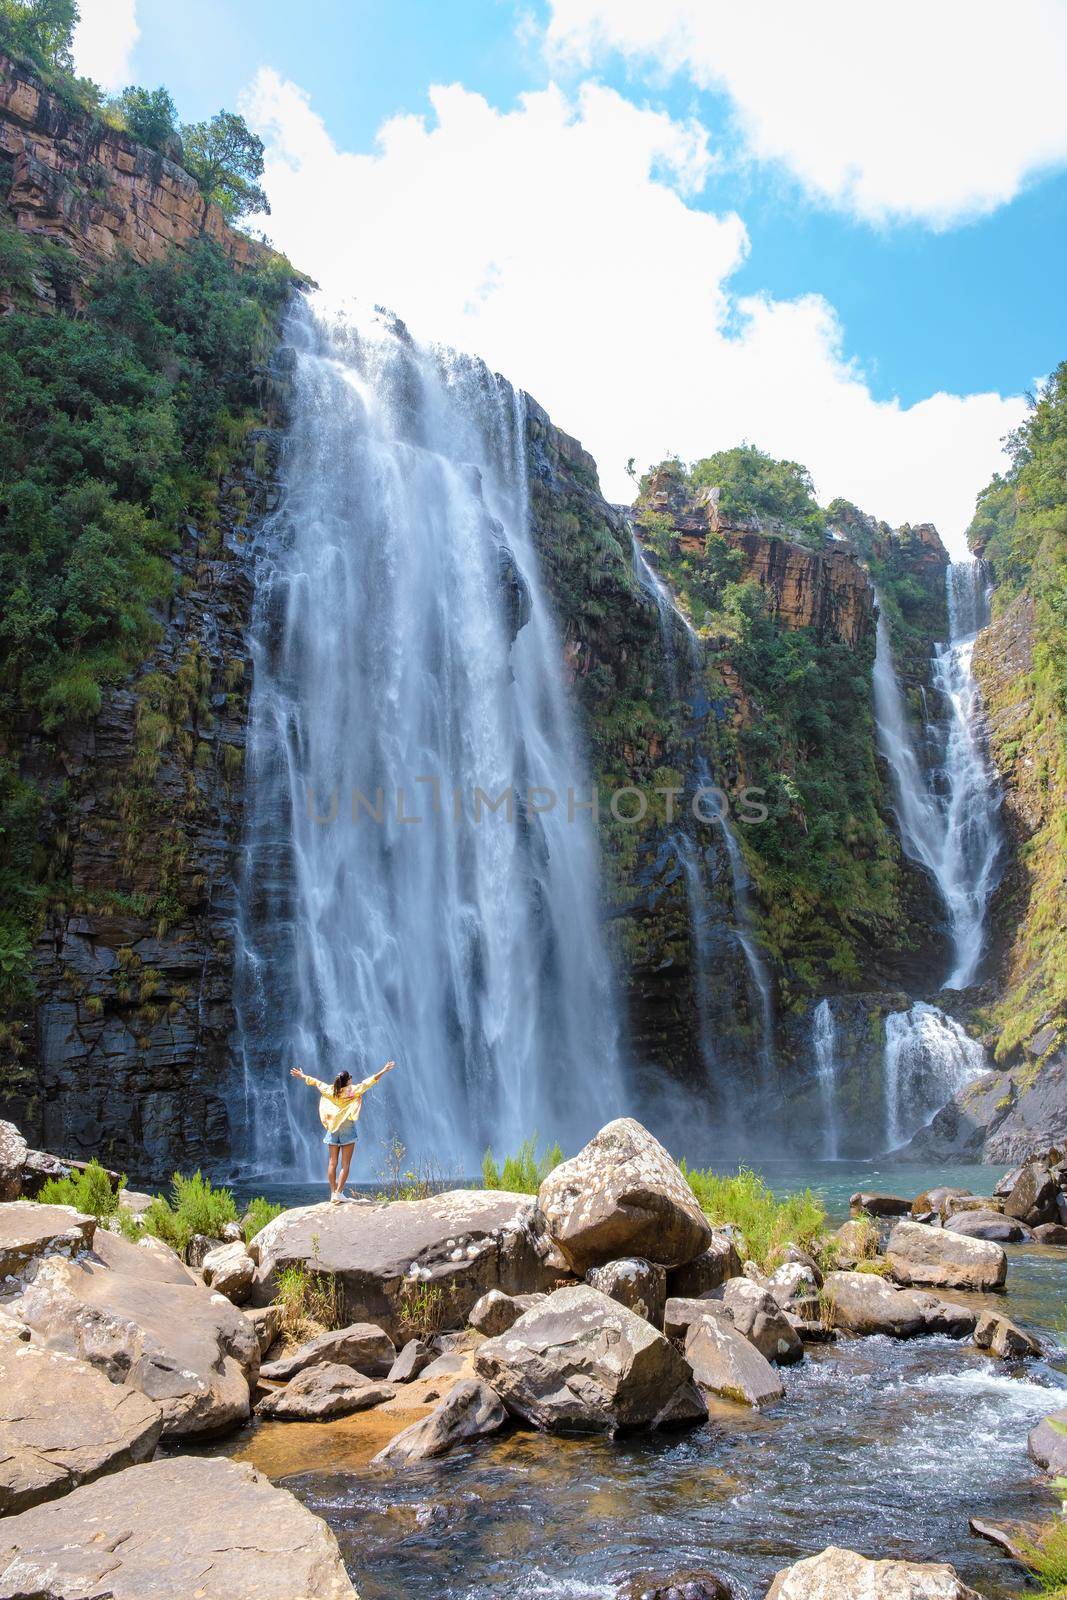 Panorama Route South Africa, Lisbon Falls South Africa, Lisbon Falls is the highest waterfall in Mpumalanga, South Africa. Asian women on vacation in South Africa